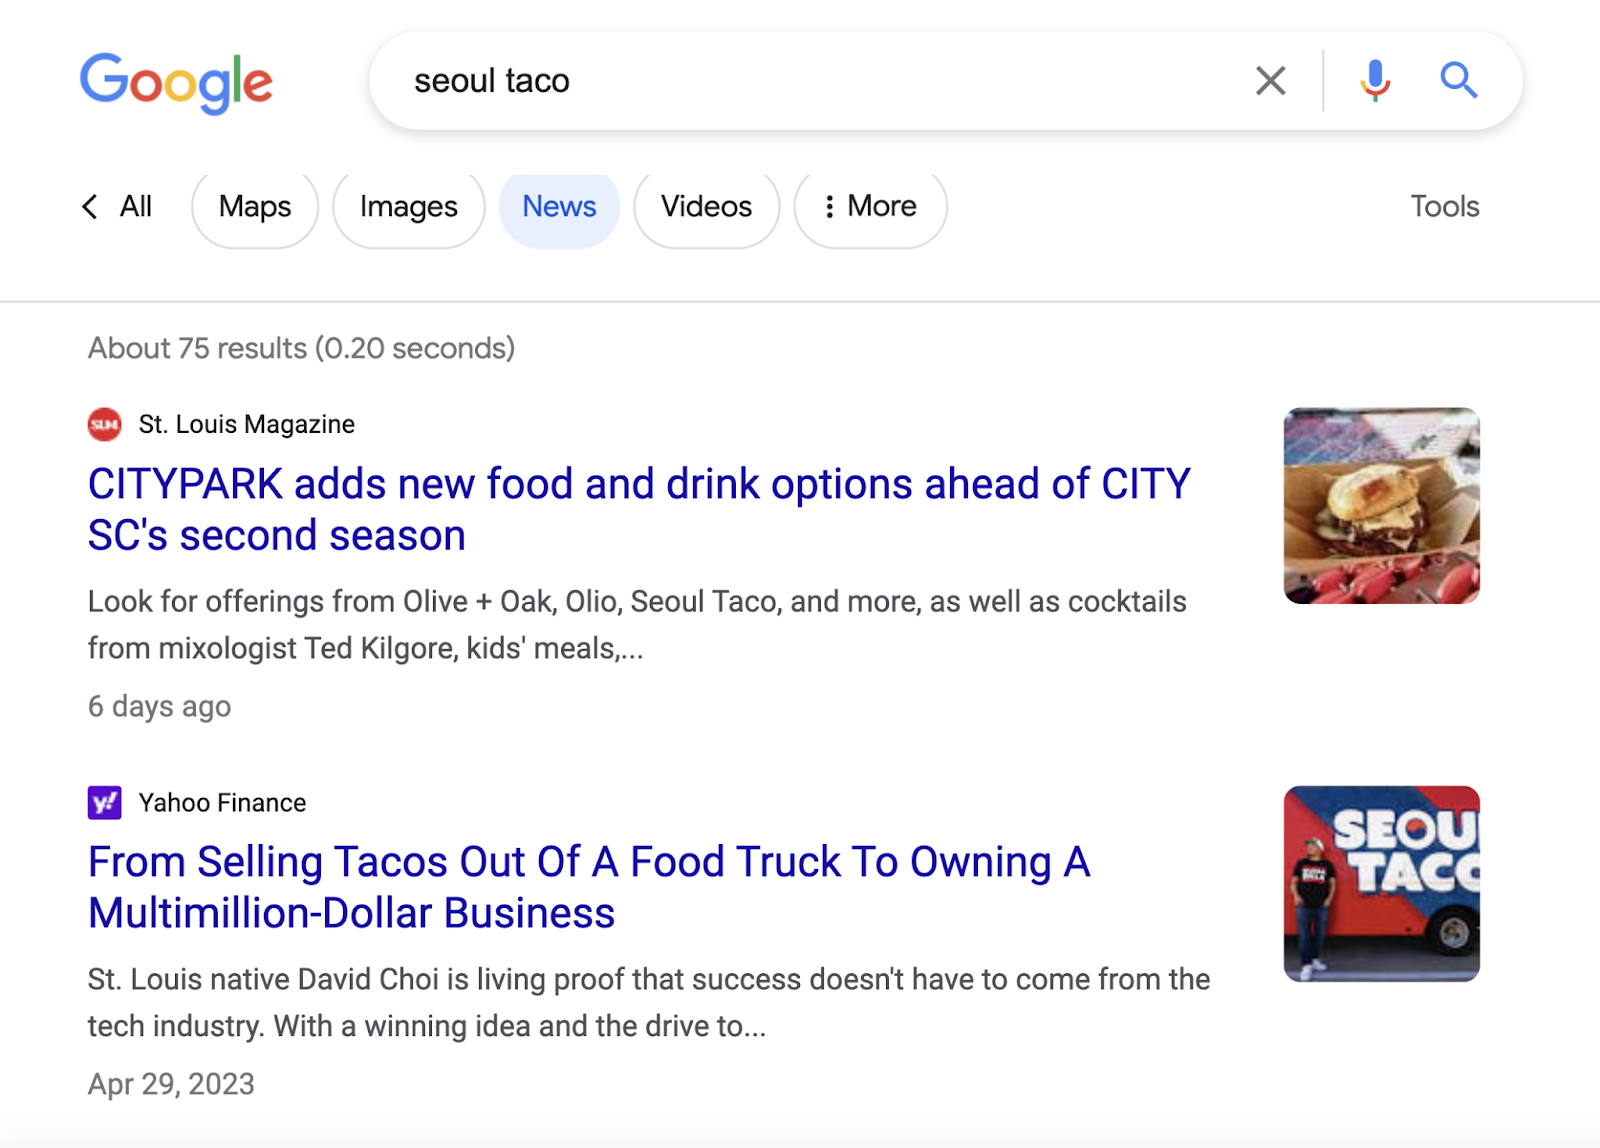 Google's “News” section for "seoul taco" query